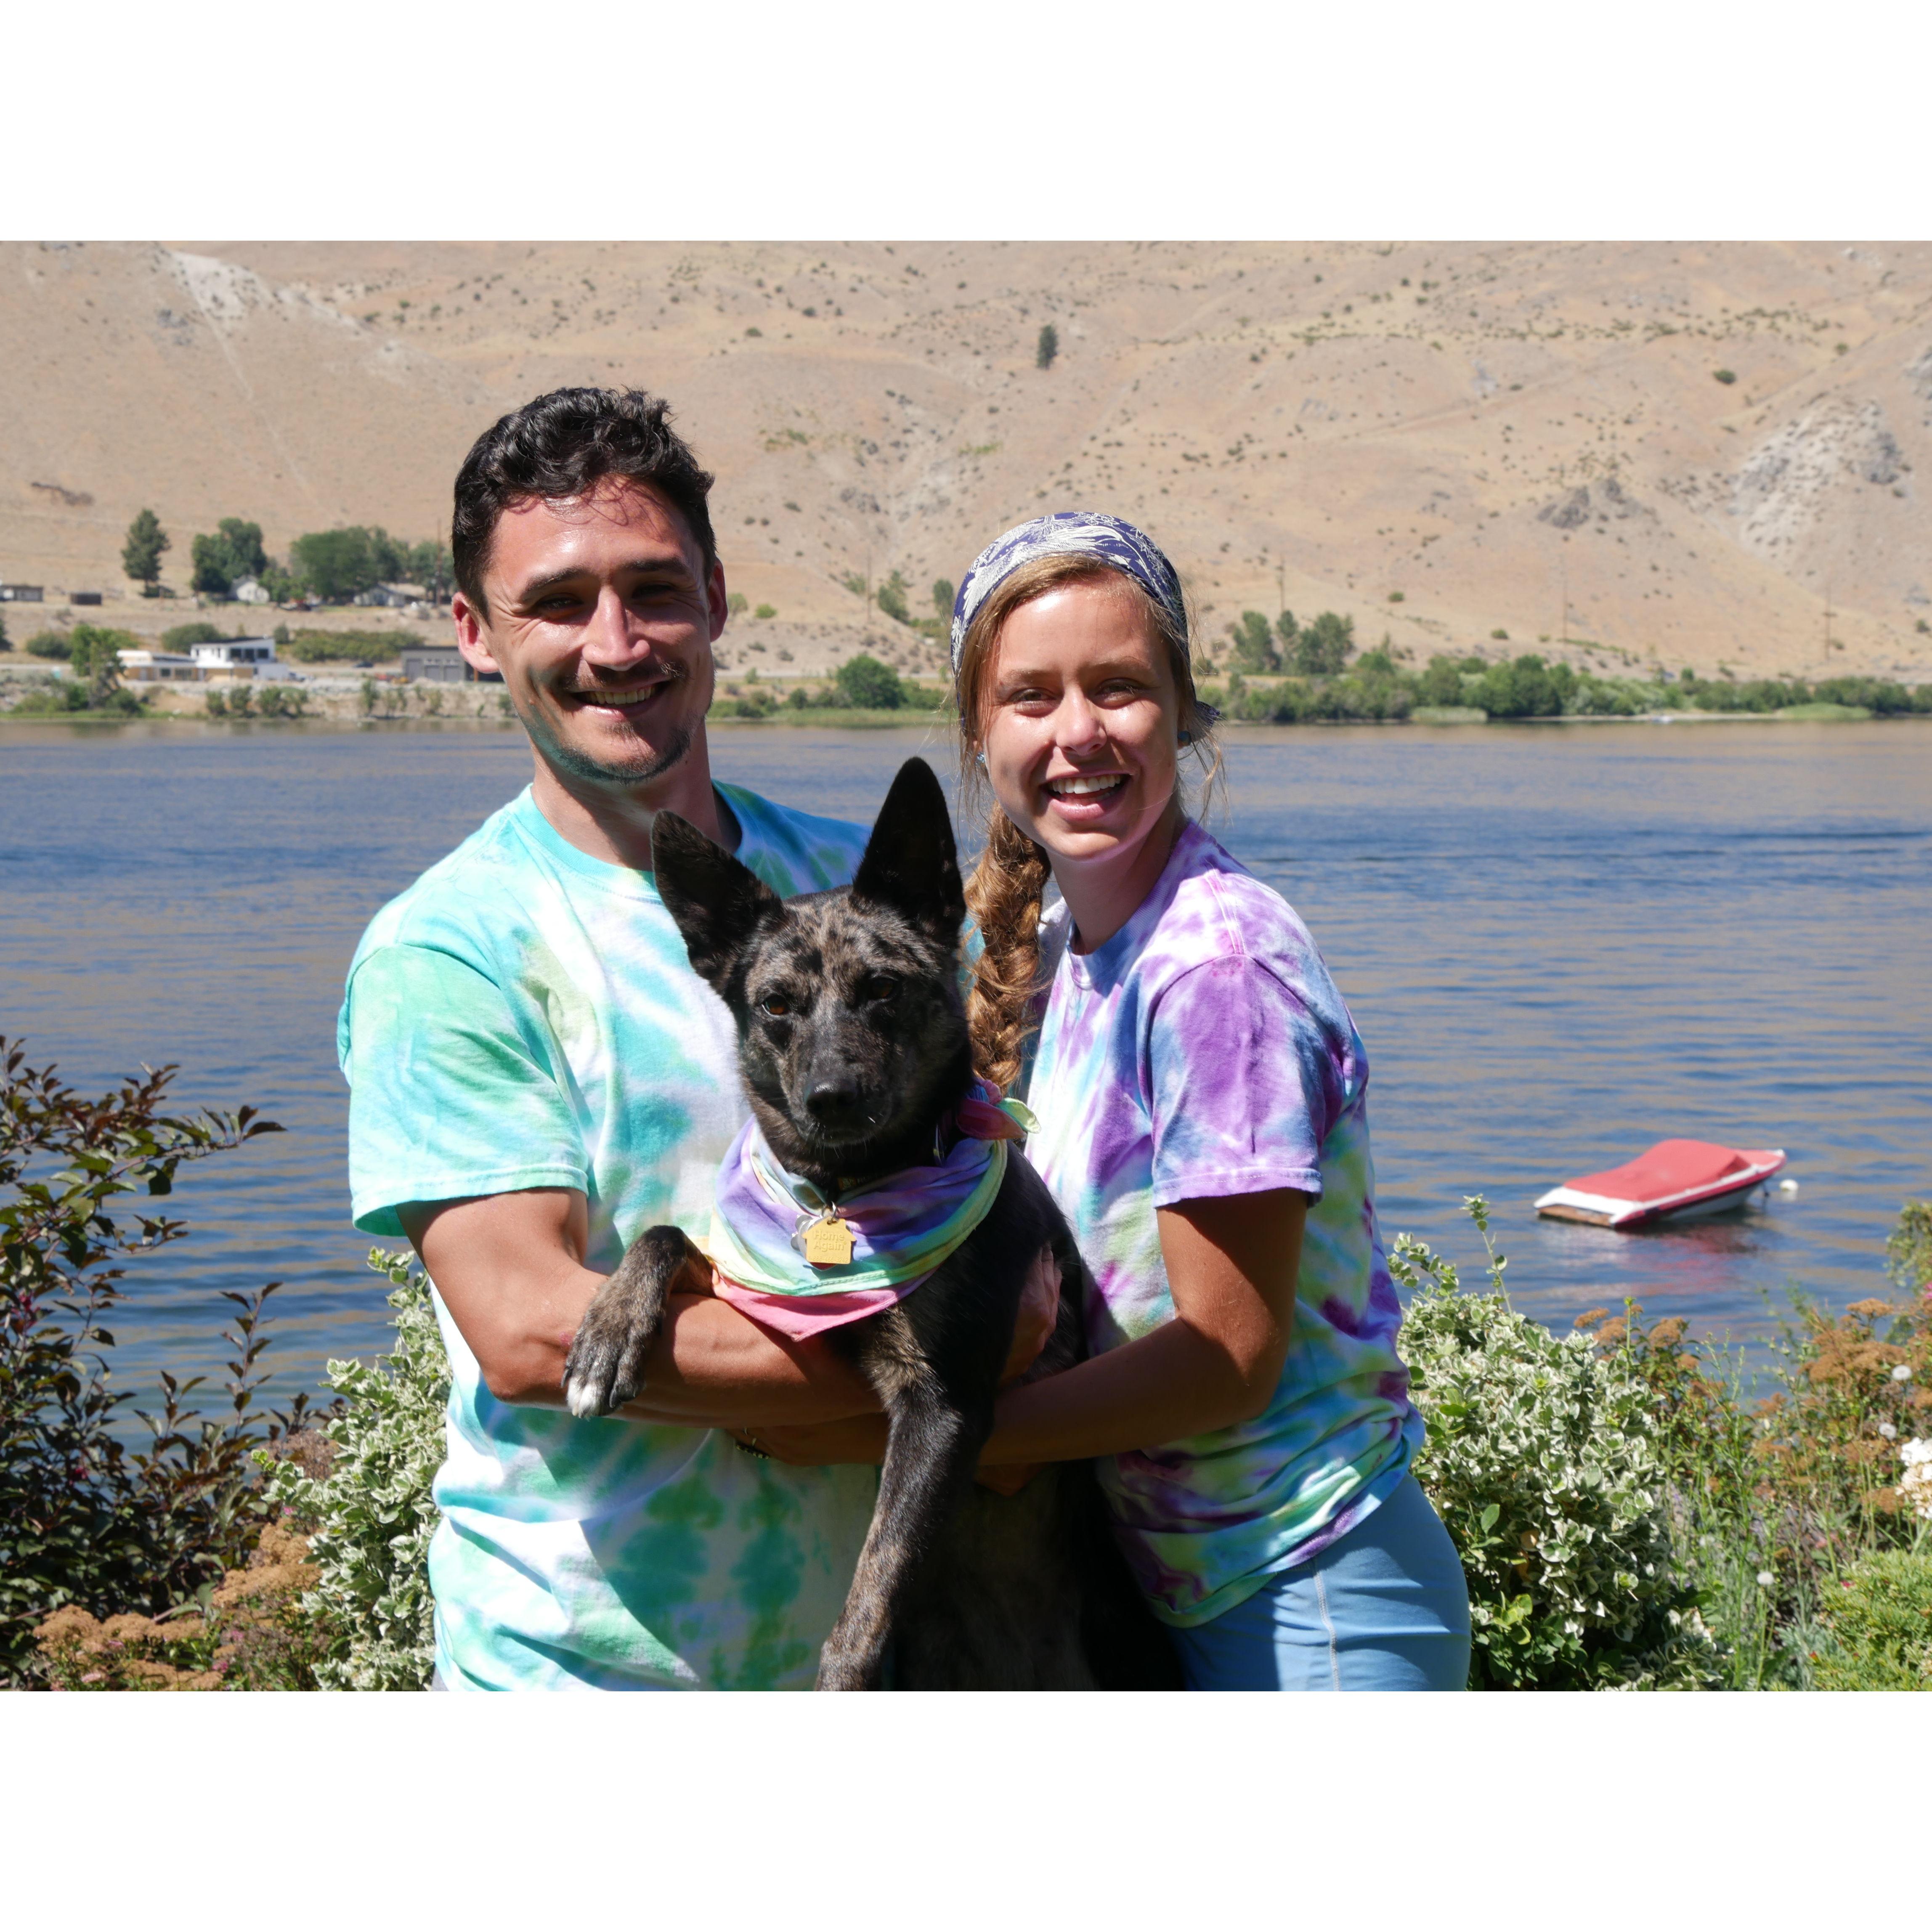 Tie-dye family at the River house!